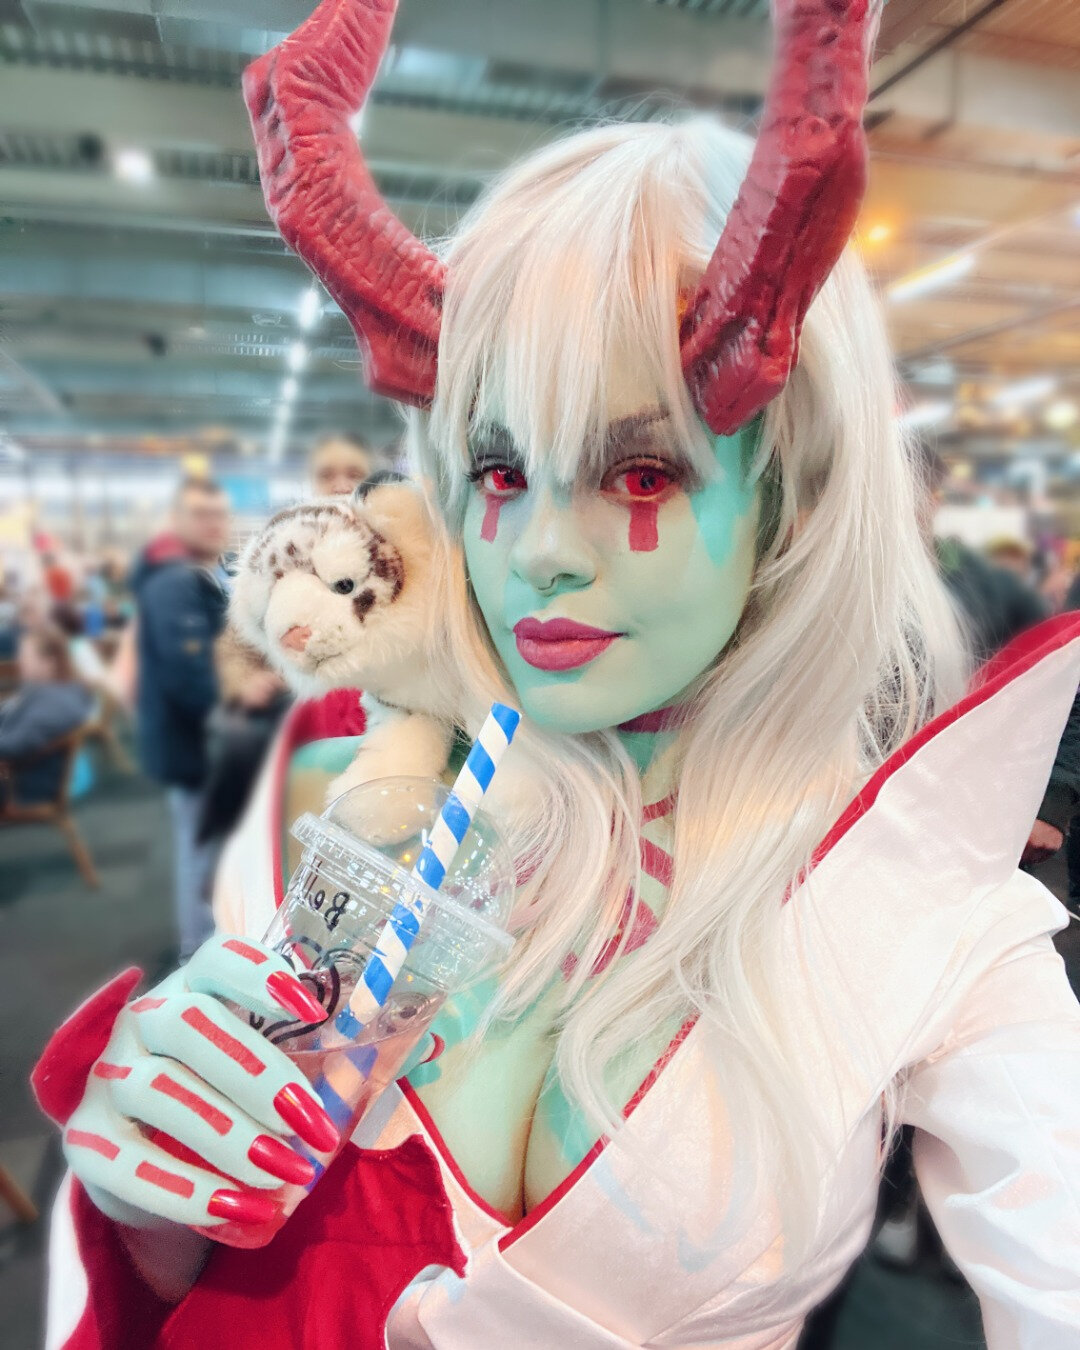 This #selfiesunday, even Devils need to hydrate! 😋 🥤

#devilkazumi #devilkazumicosplay #tekken #tekken7 #tekkencosplay #fgc #fightinggame #fightinggamecosplay #cosplaygirl #cosplay #cosplayer #blackcosplay